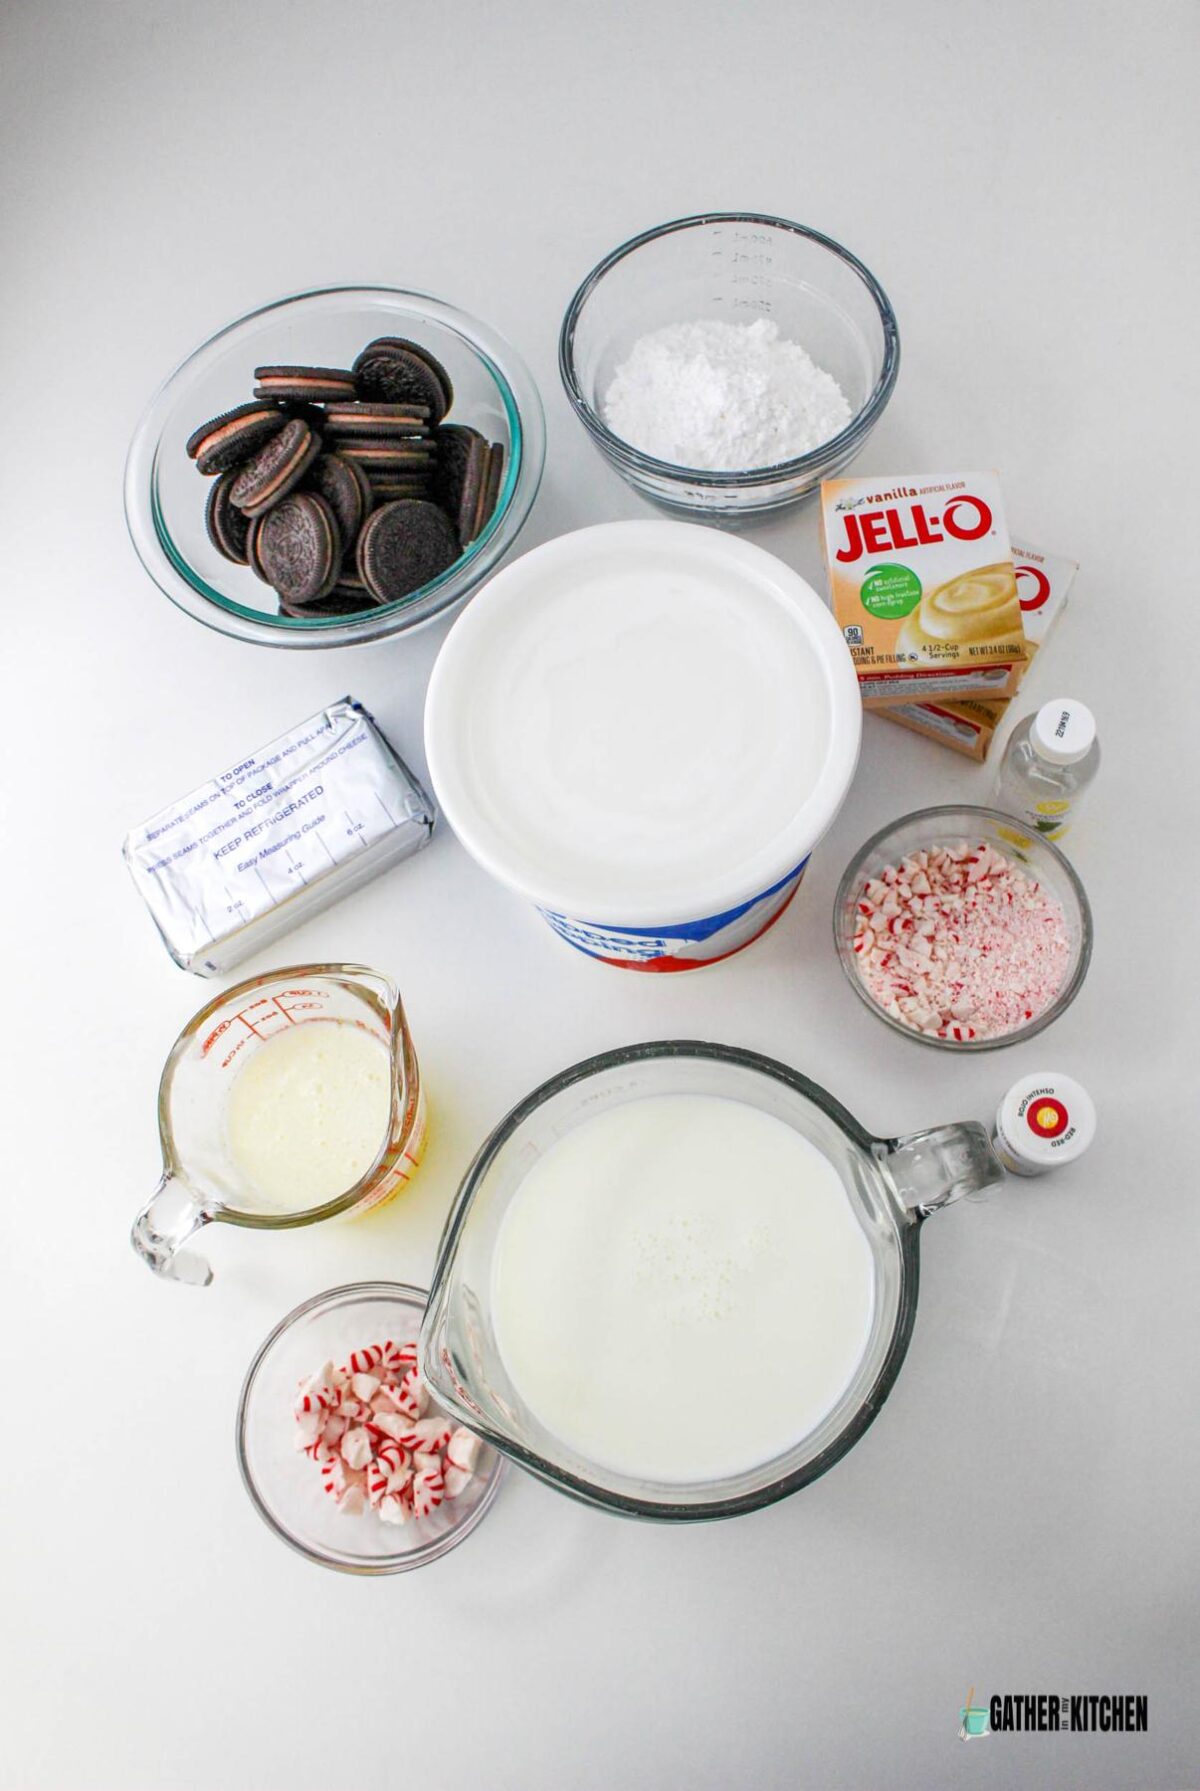 Ingredient for candy cane lush: Oreos, powdered sugar, whipped topping, boxes of Instant vanilla pudding, peppermint extract, crushed peppermint candy, red food dye, milk, peppermint candies,  melted butter, and cream cheese.